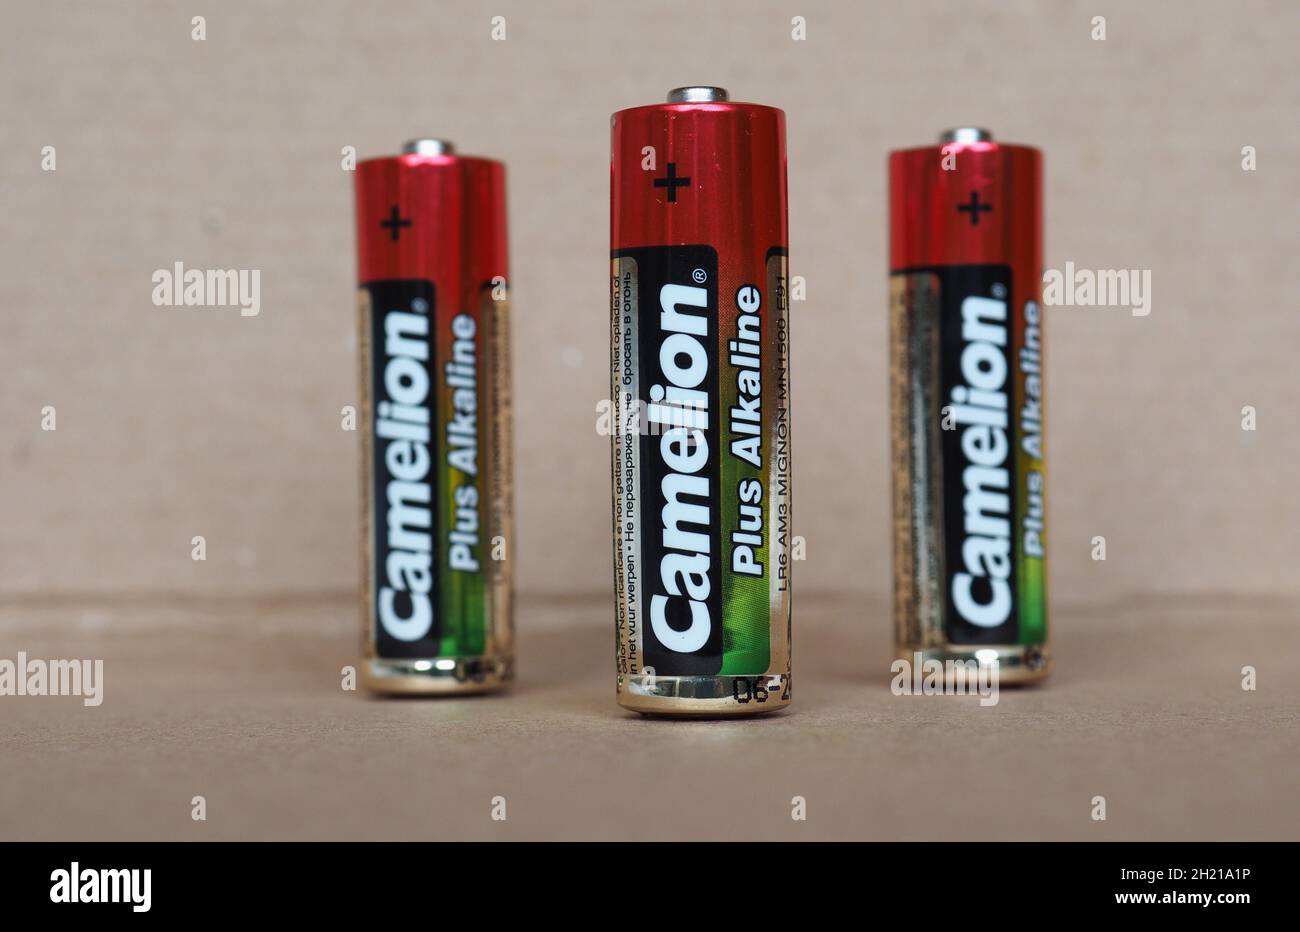 SHENZHEN, CHINA - CIRCA AUGUST 2021: Camelion 1.5 V AAA batteries Stock  Photo - Alamy